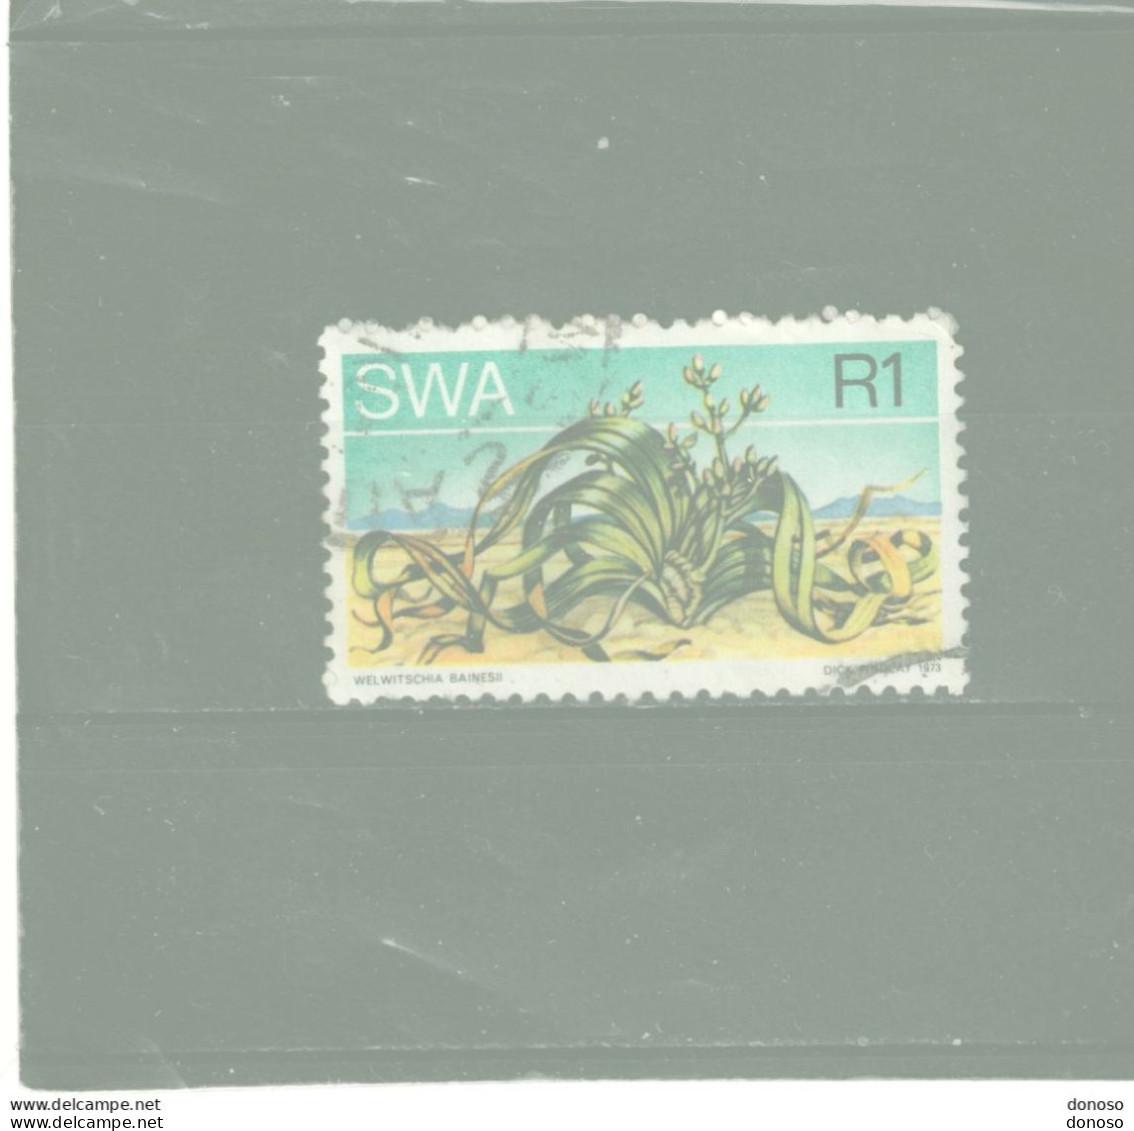 SWA SUD OUEST AFRICAIN 1973 Welwischia Yvert 331 Oblitéré Cote Yv 6,50 Euros - South West Africa (1923-1990)